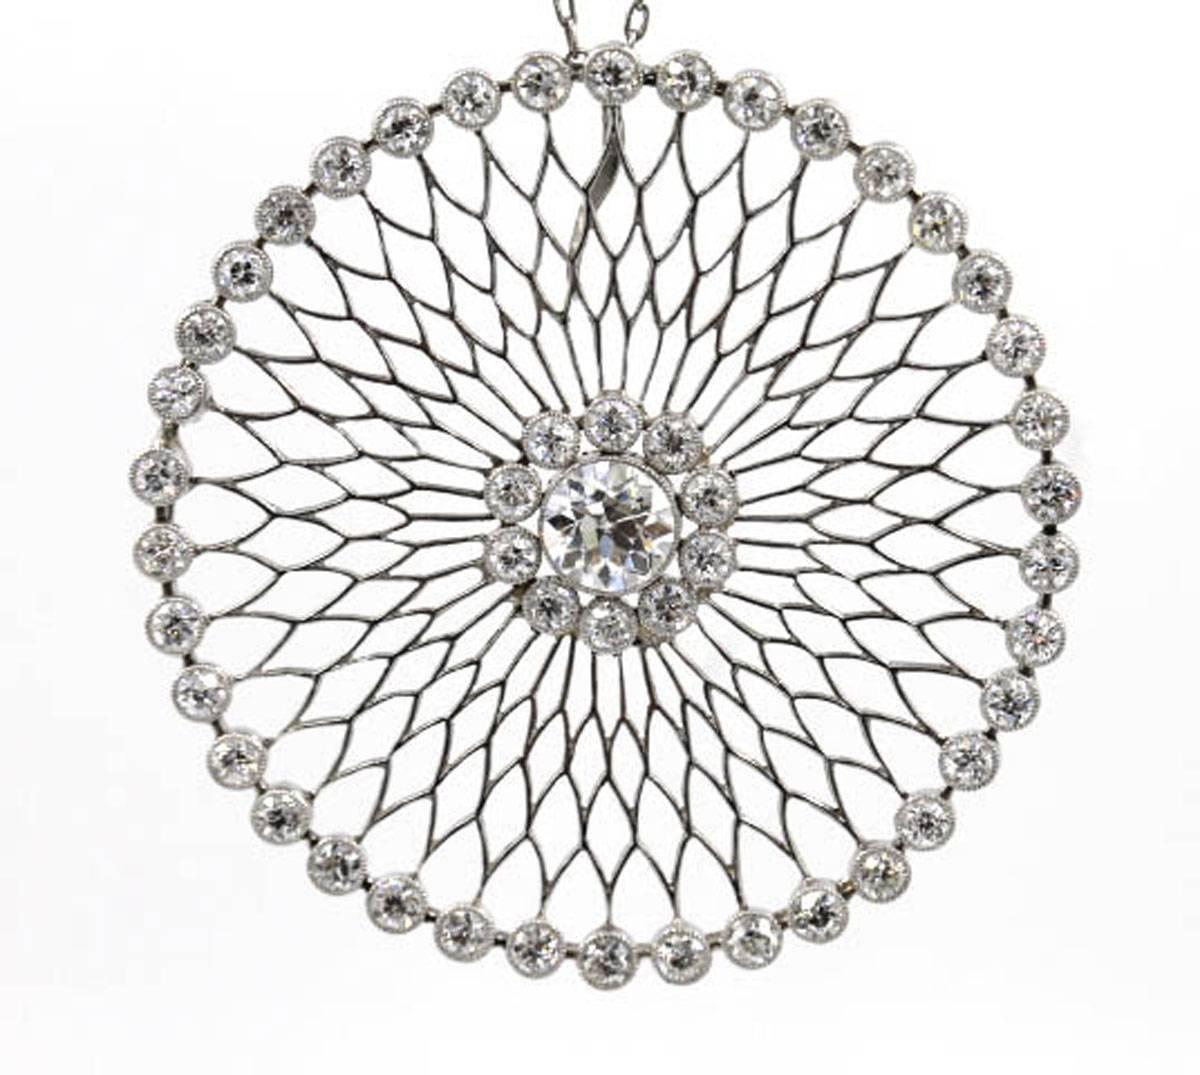 This beautiful Edwardian pendant features a center 1 1/4 carat Old European Cut diamond surrounded by 48 side diamonds that equal approximately 3 carat total weight. The circle pendant measures 1 3/4 inches in diameter, and is hung on a 17 inch